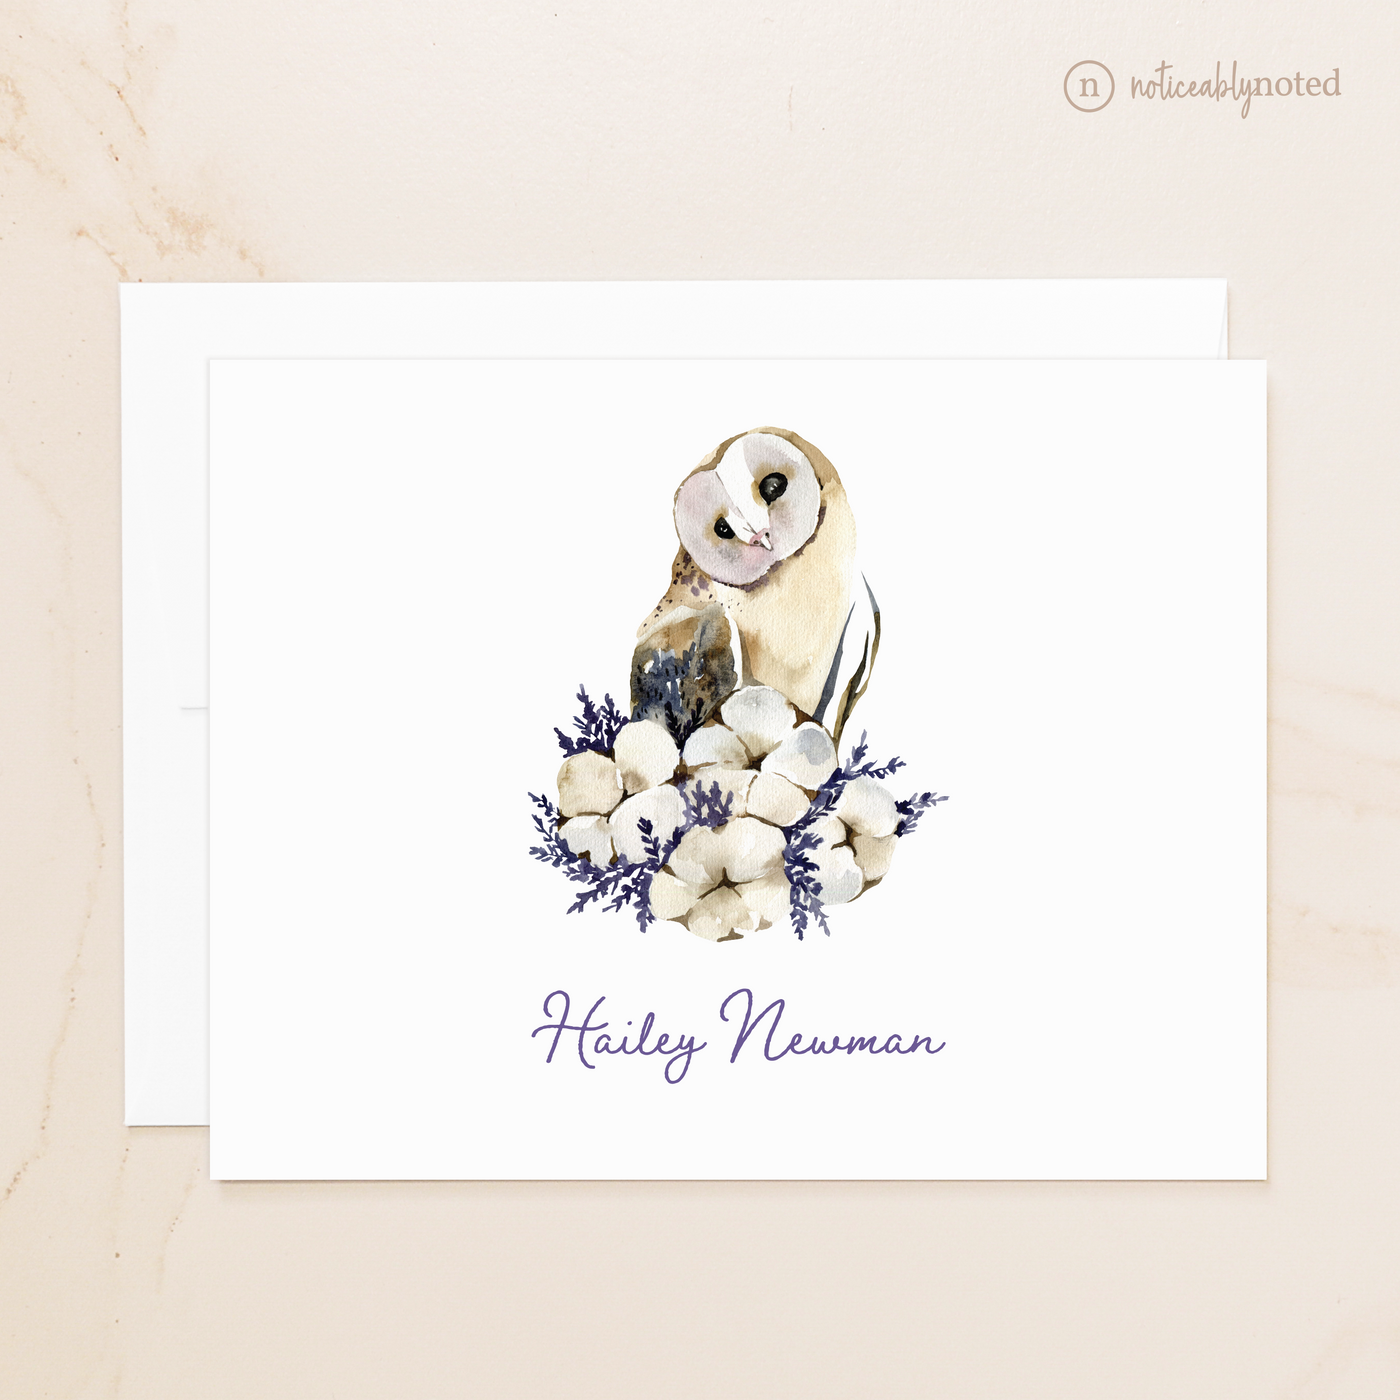 Personalized Owl Folded Cards | Noticeably Noted